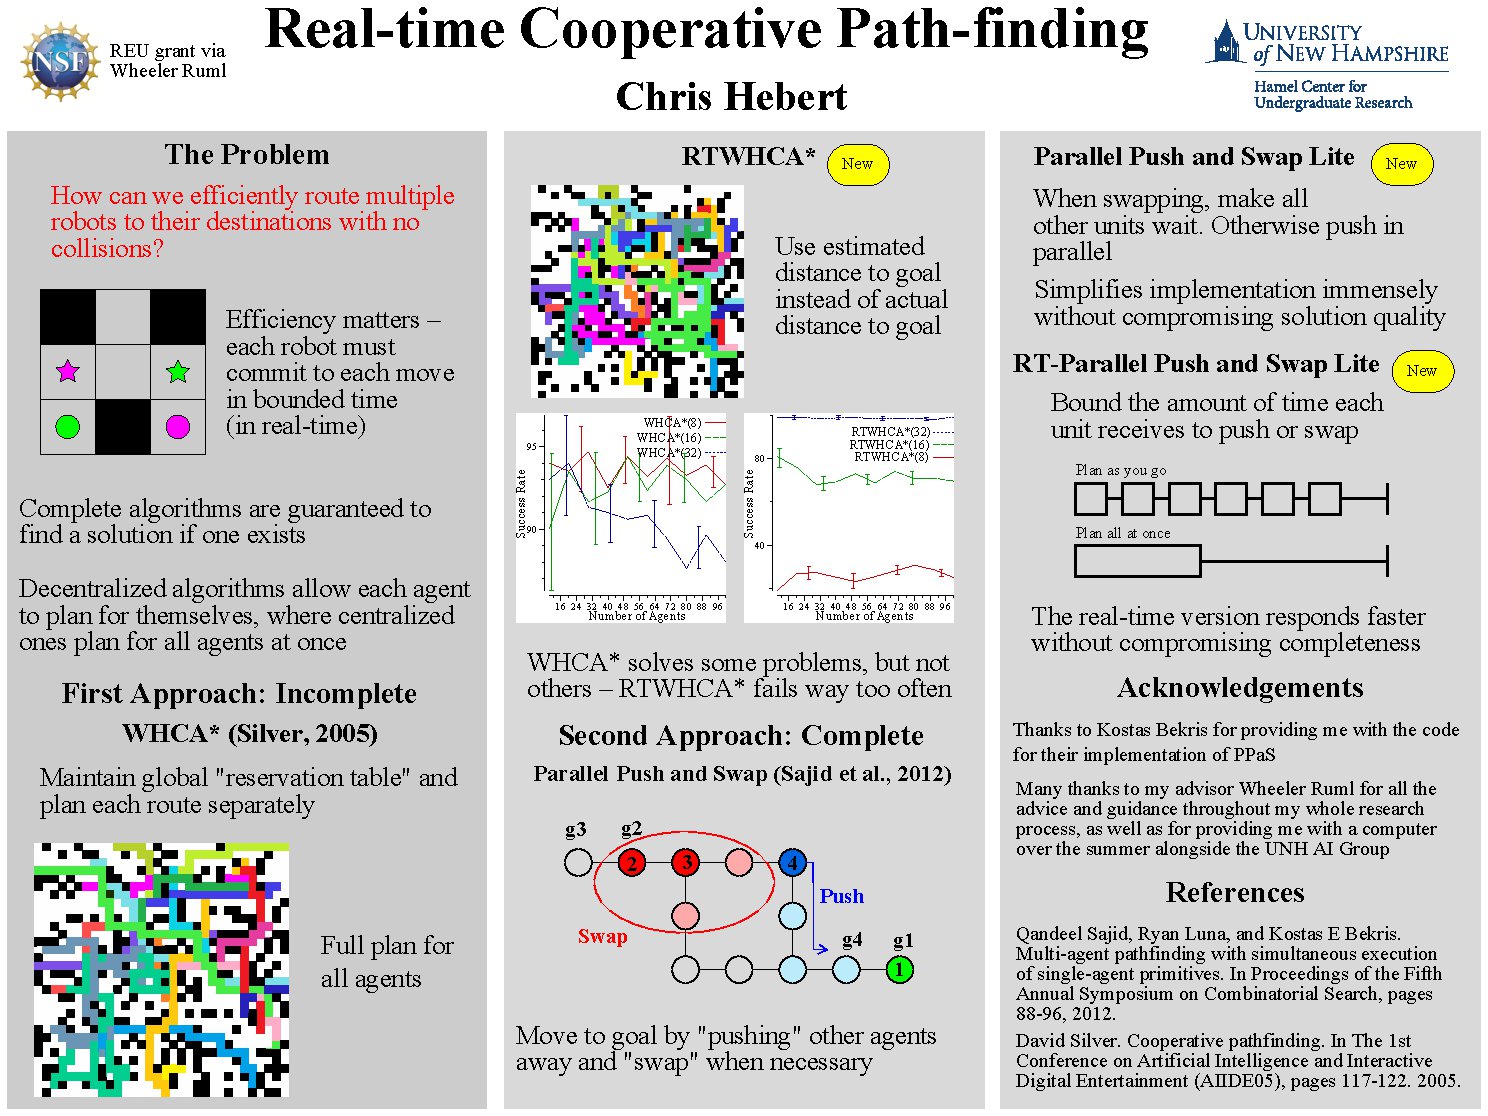 Real-Time Cooperative Path-Finding by crb46